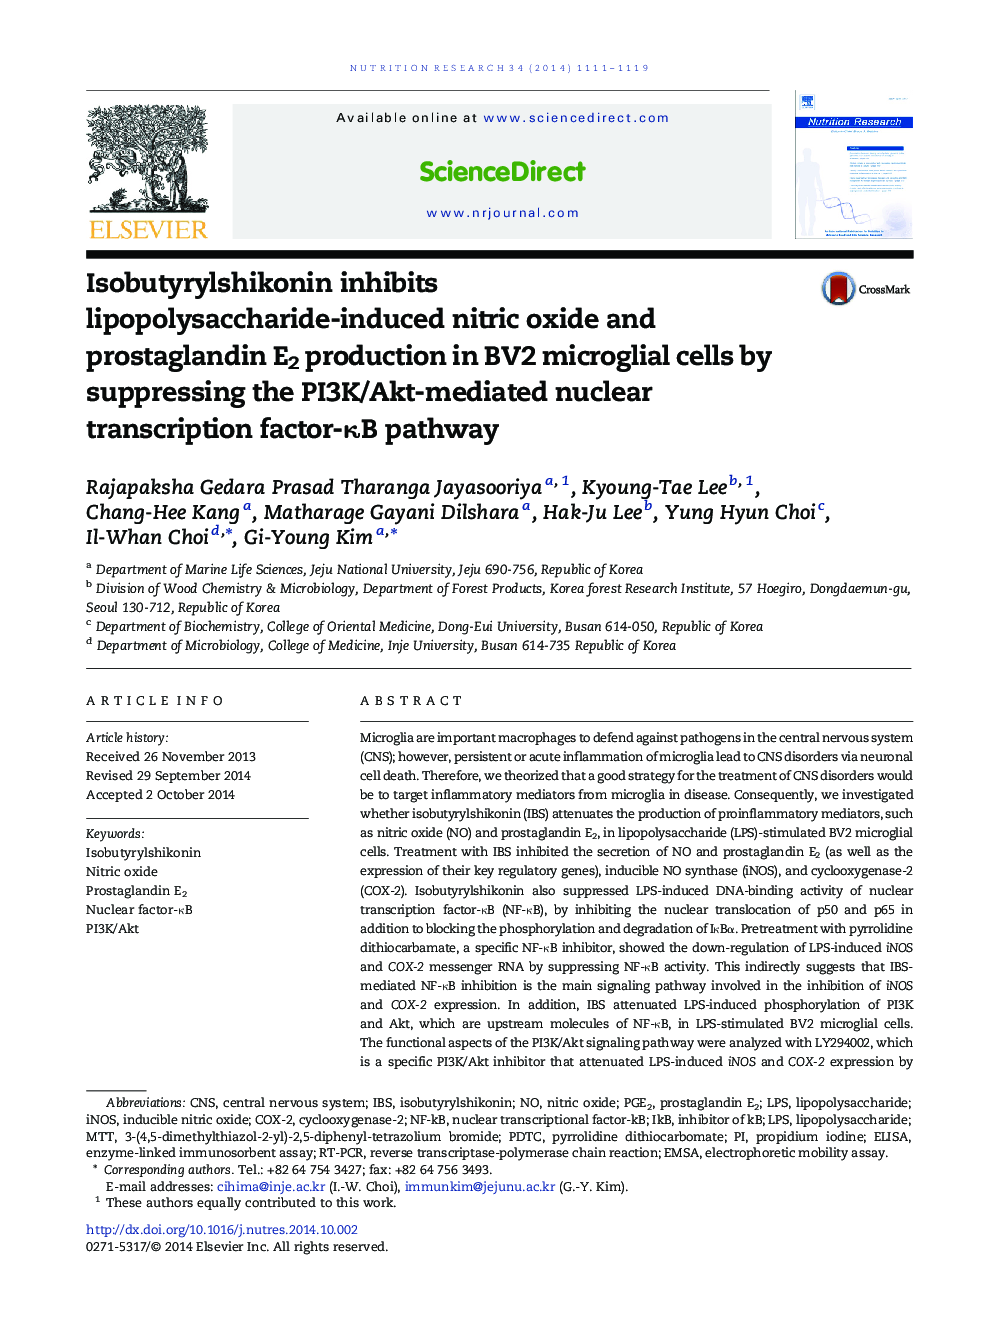 Isobutyrylshikonin inhibits lipopolysaccharide-induced nitric oxide and prostaglandin E2 production in BV2 microglial cells by suppressing the PI3K/Akt-mediated nuclear transcription factor-κB pathway